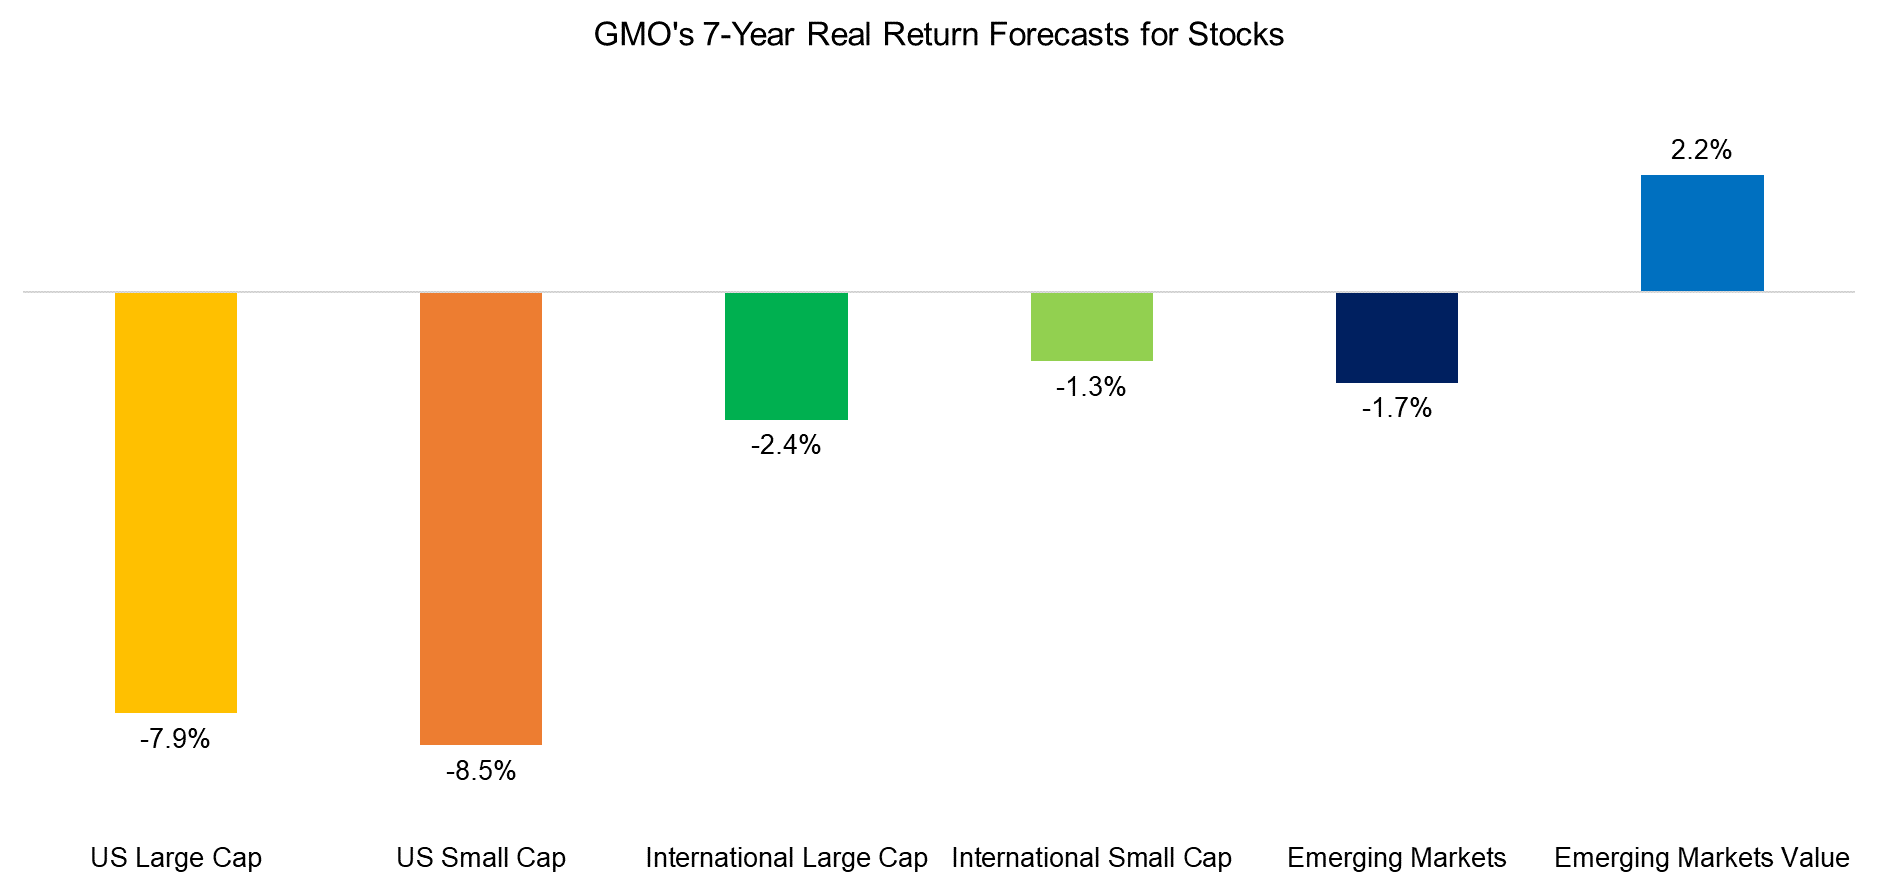 GMO's 7-Year Real Return Forecasts for Stocks